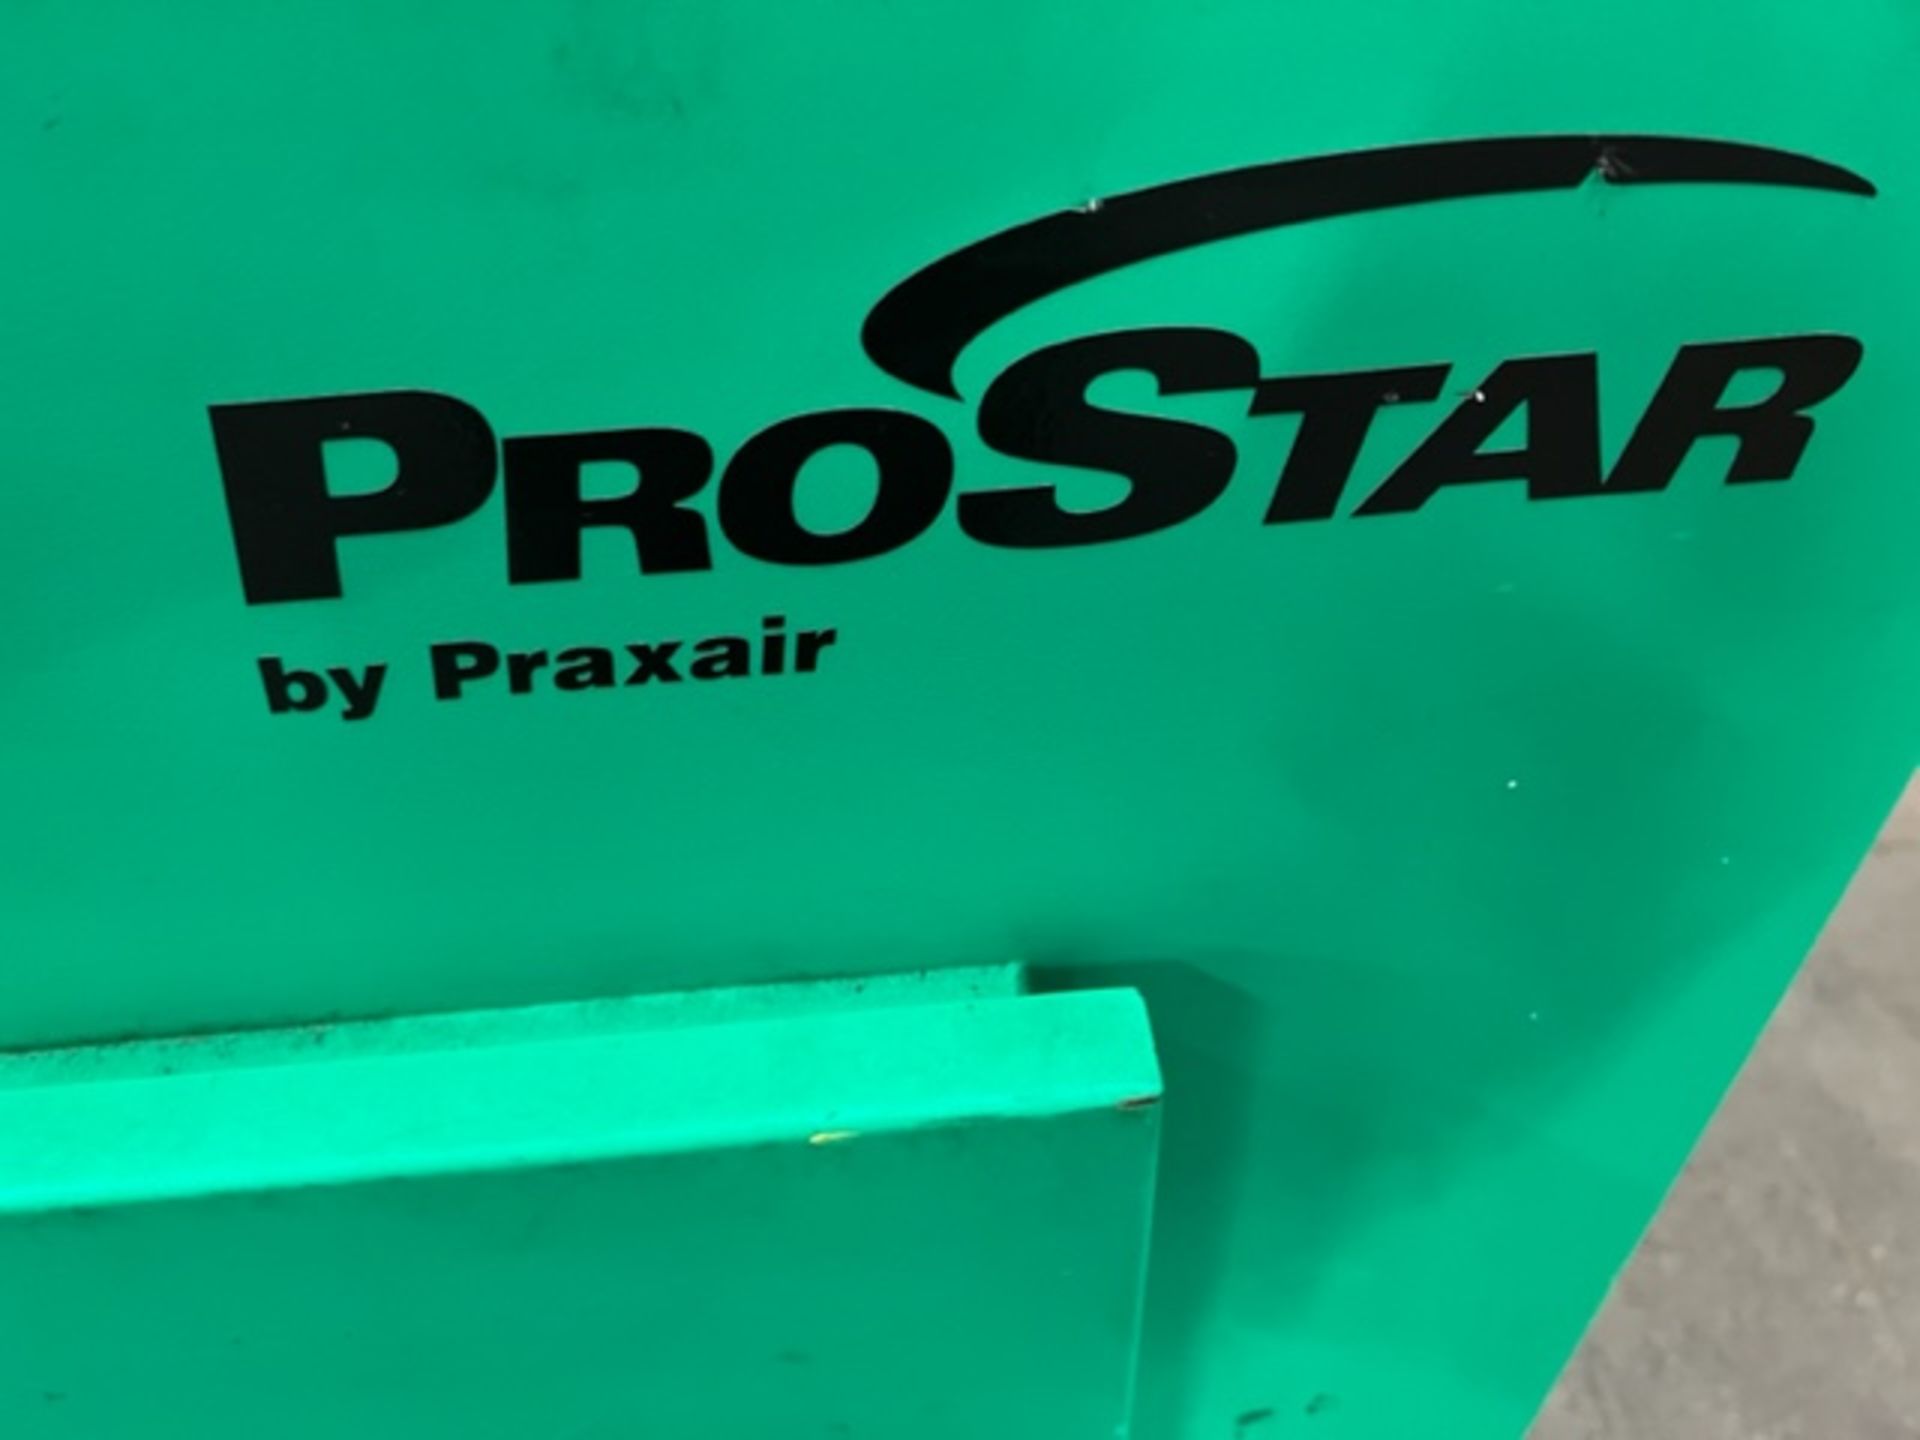 ProStar by Praxair mode 1200-810 Fume Extractor with long reach snorkel arm - 120V single phase - Image 2 of 4